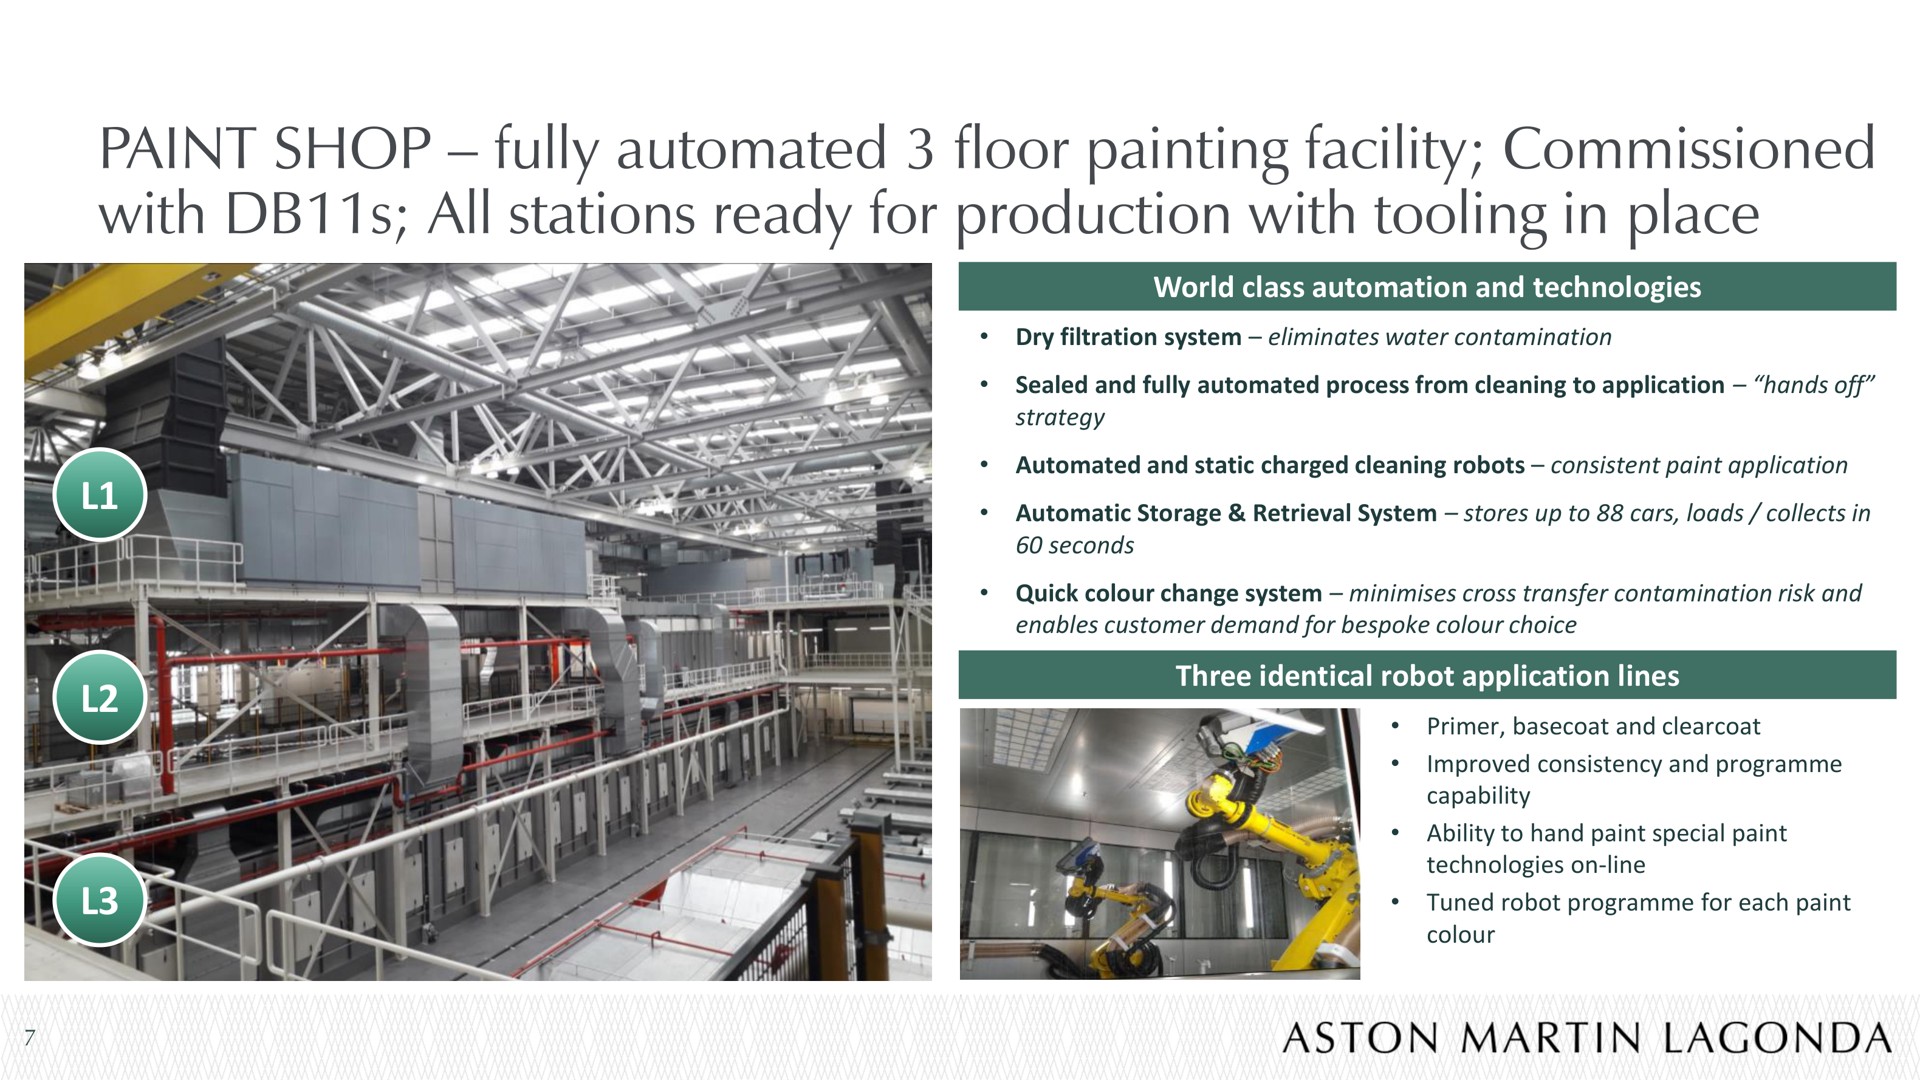 paint shop fully floor painting facility commissioned with all stations ready for production with tooling in place | Aston Martin Lagonda